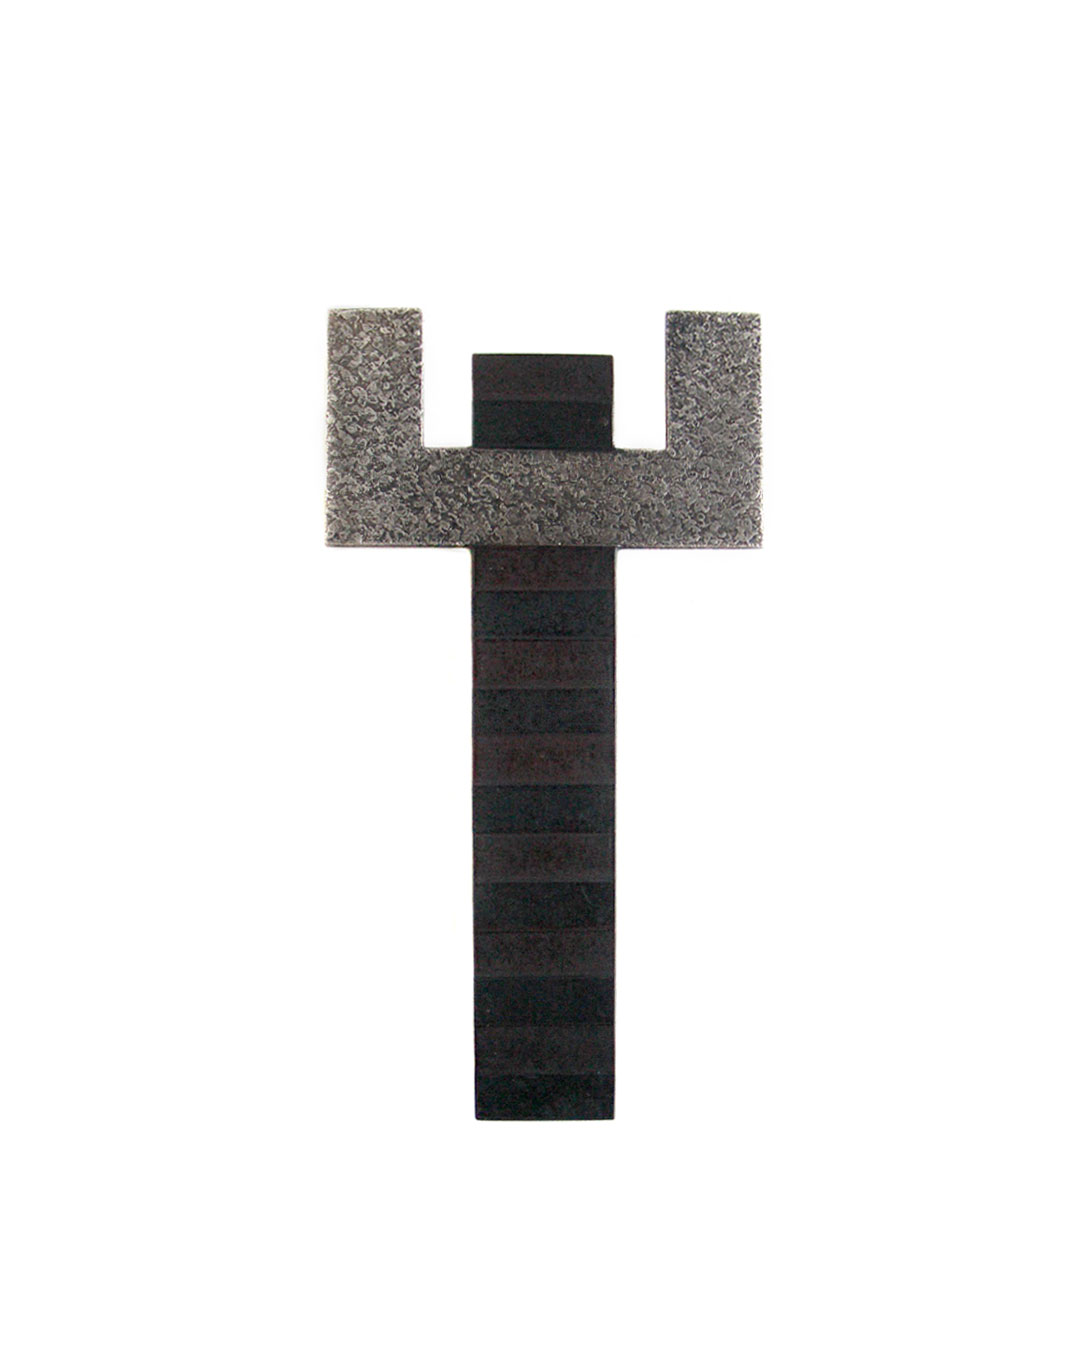 Tore Svensson, 18 Square Centimetres, 2006, brooch; steel, partly gilt, partly silver-plated, 90 x 40 x 1.5 mm, €325